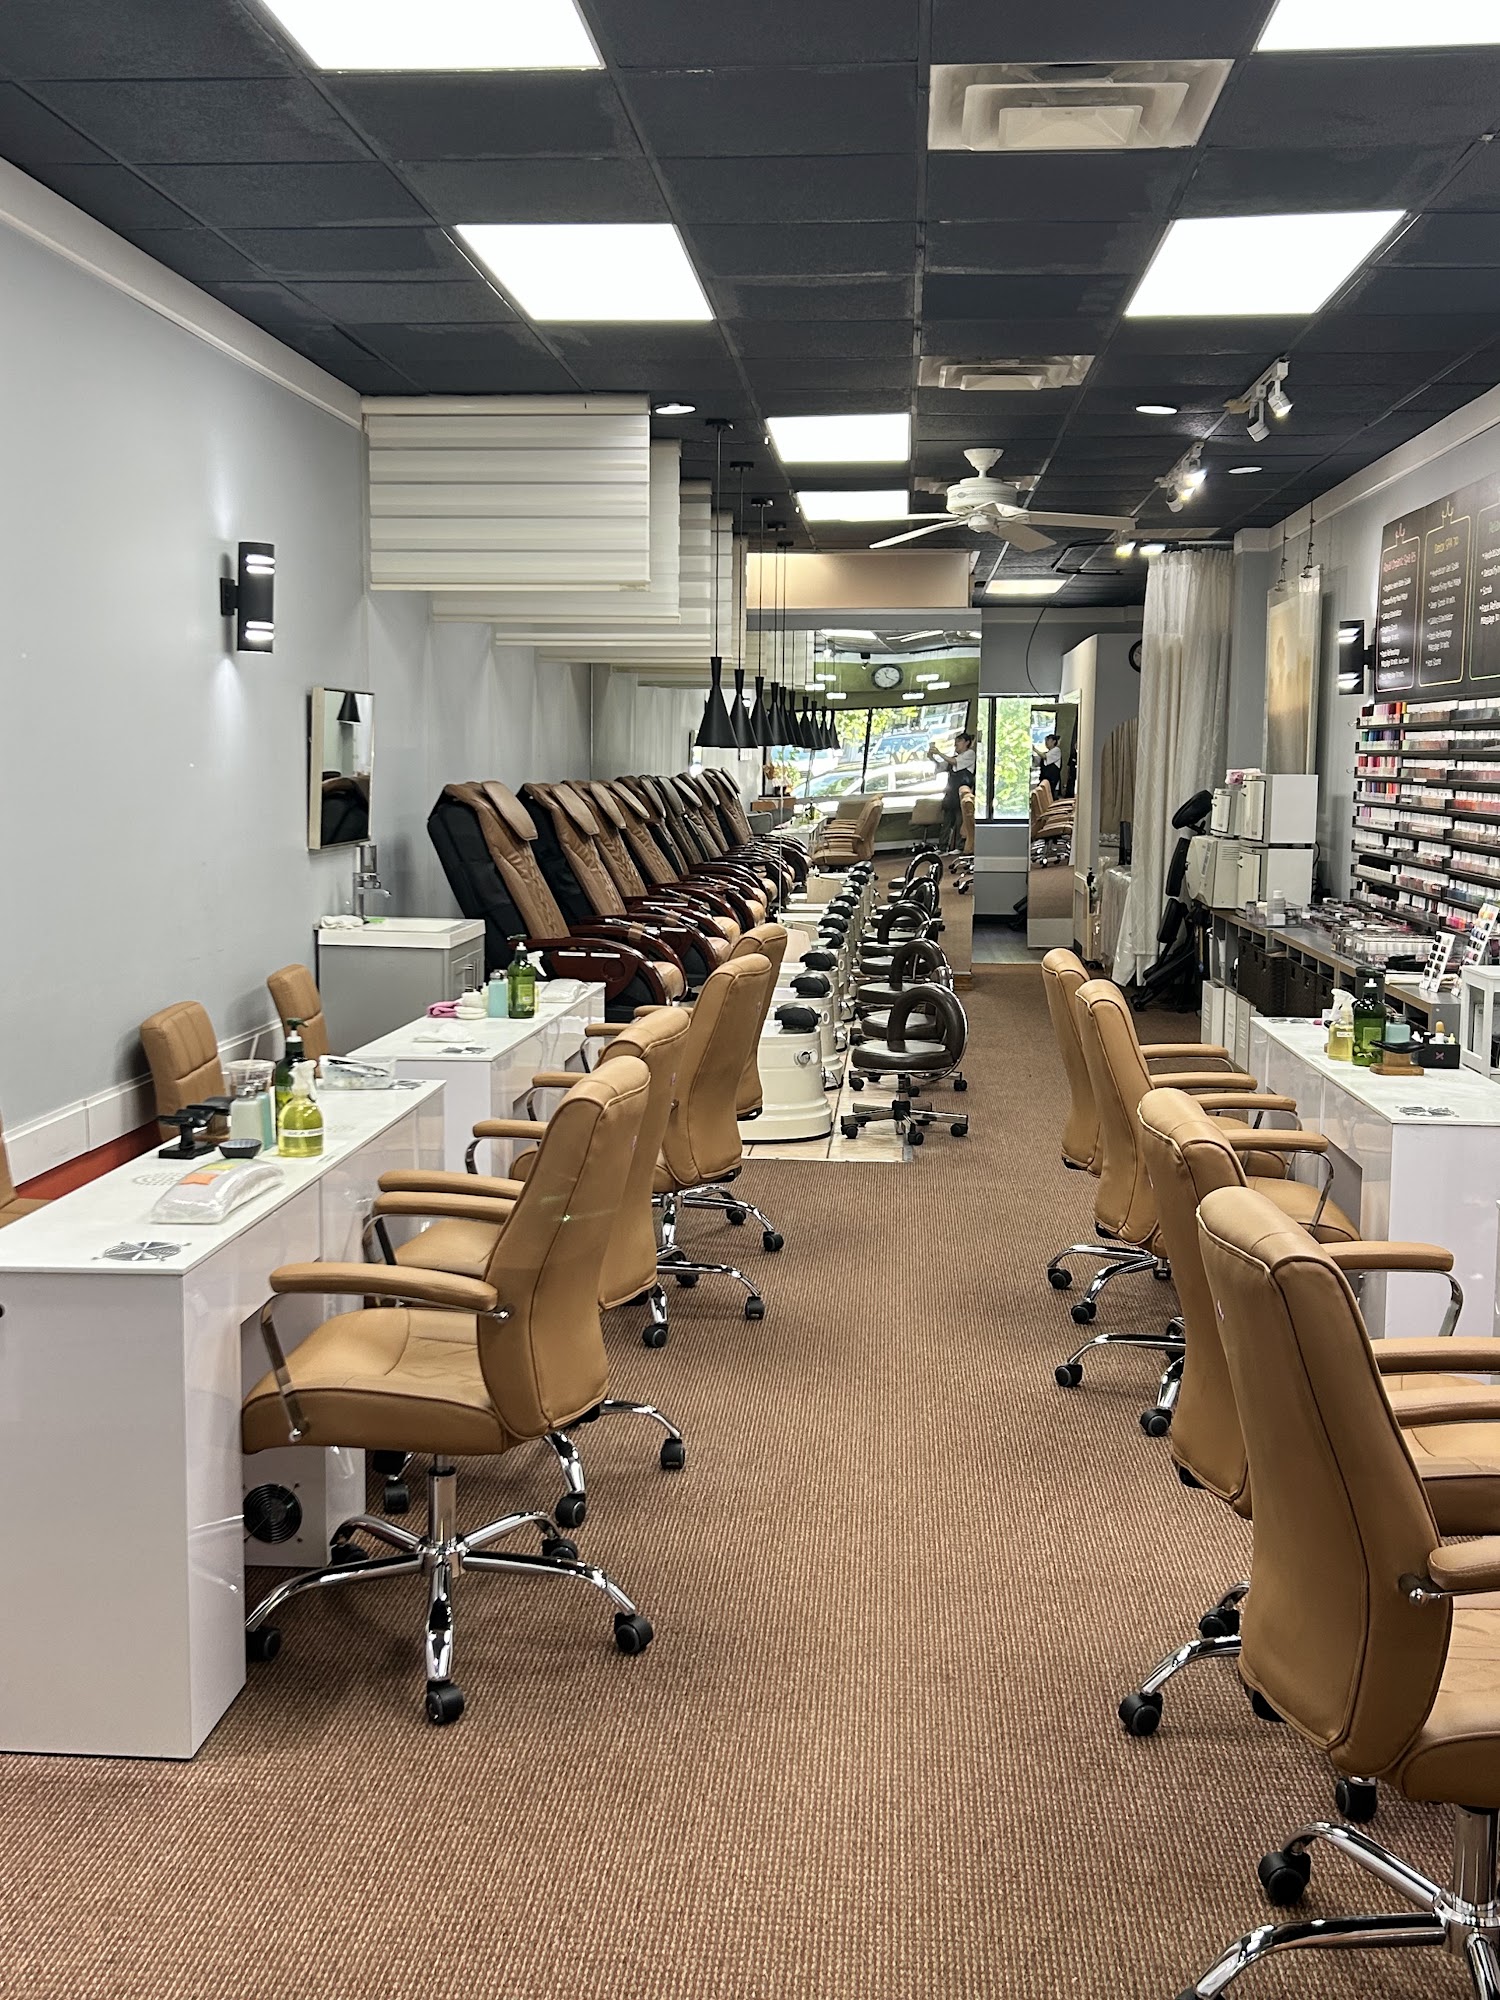 Royal Nail & Skin Care 1139 Pleasantville Rd, Briarcliff Manor New York 10510